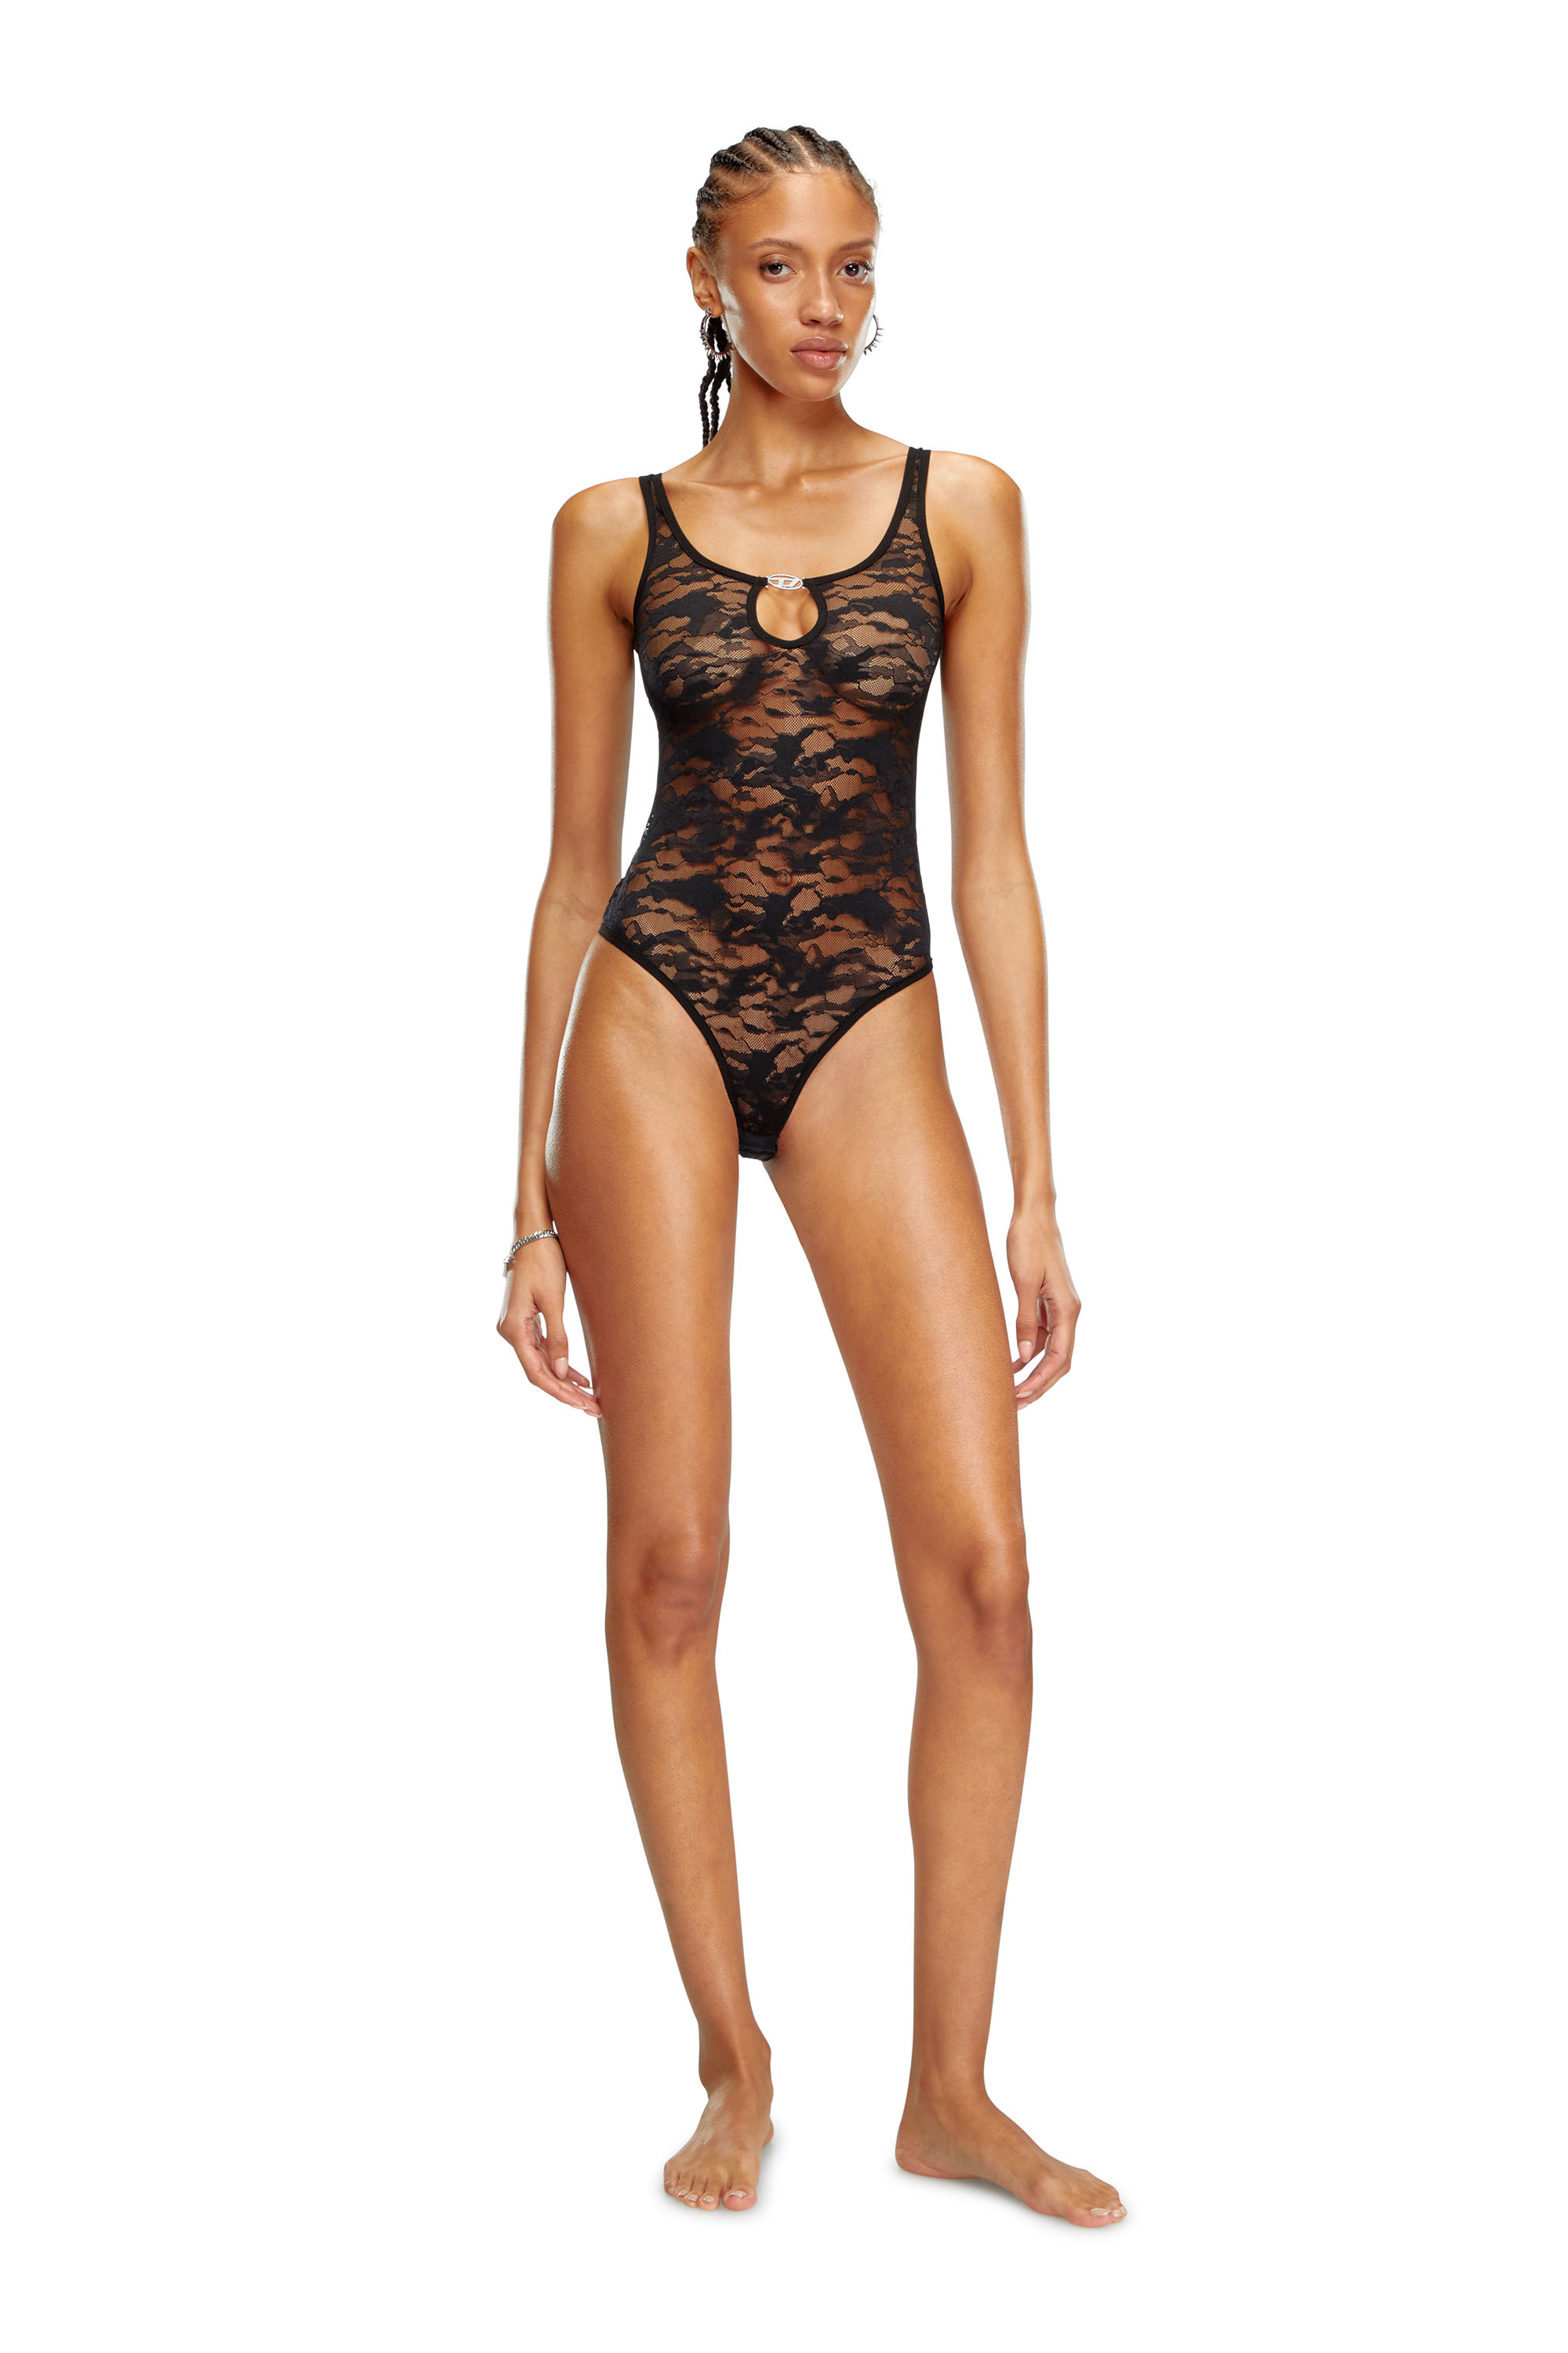 Diesel - UFBY-D-OVAL-LACE-BODYSUIT, Donna Body in pizzo camouflage con placca Oval D in Nero - Image 2